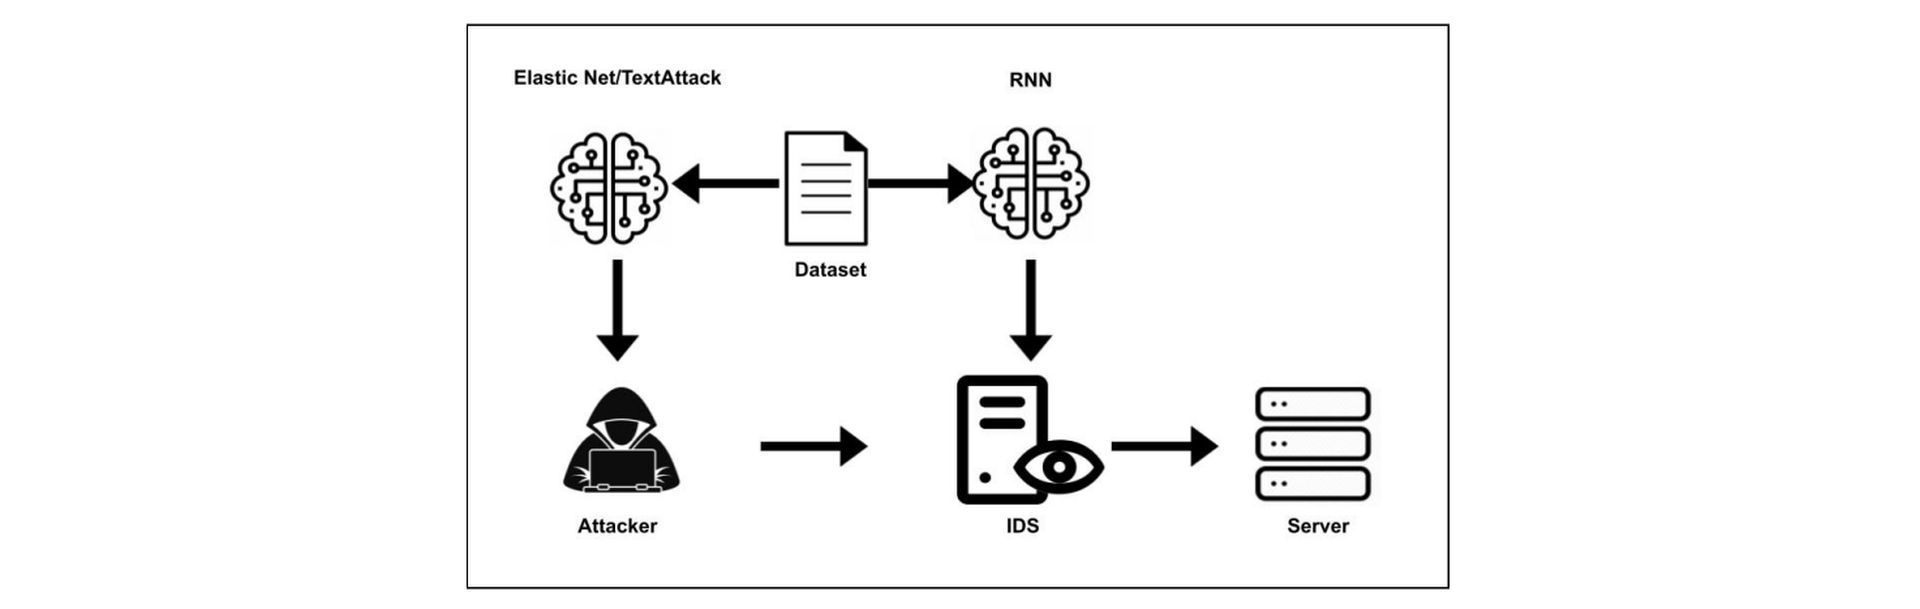 Researchers from Citadel developed a deep learning method to generate DNS amplification attacks.